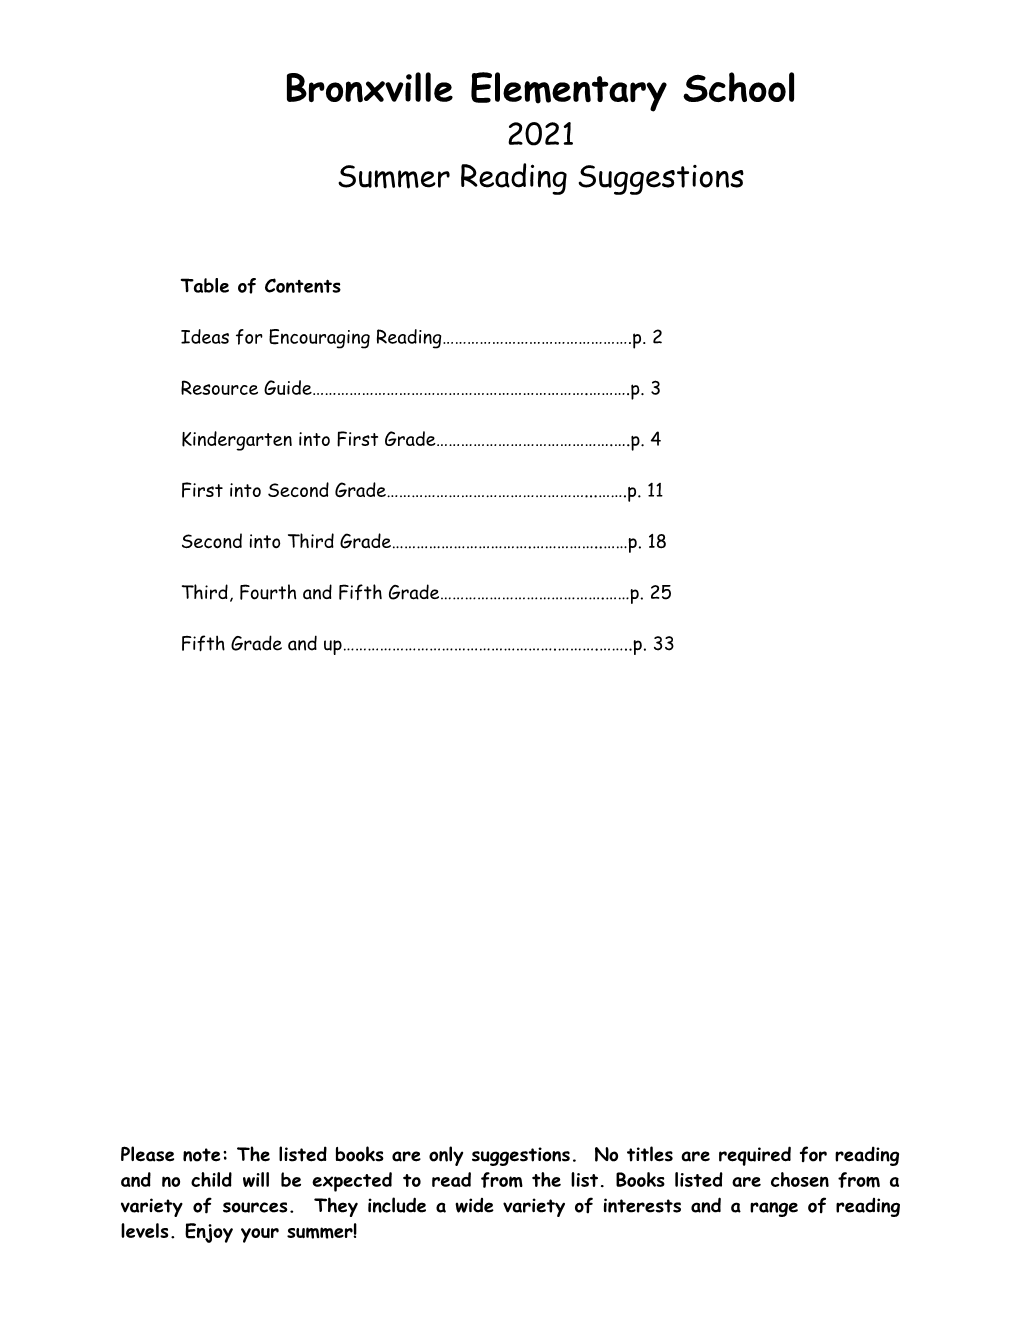 2021 Summer Reading Suggestions